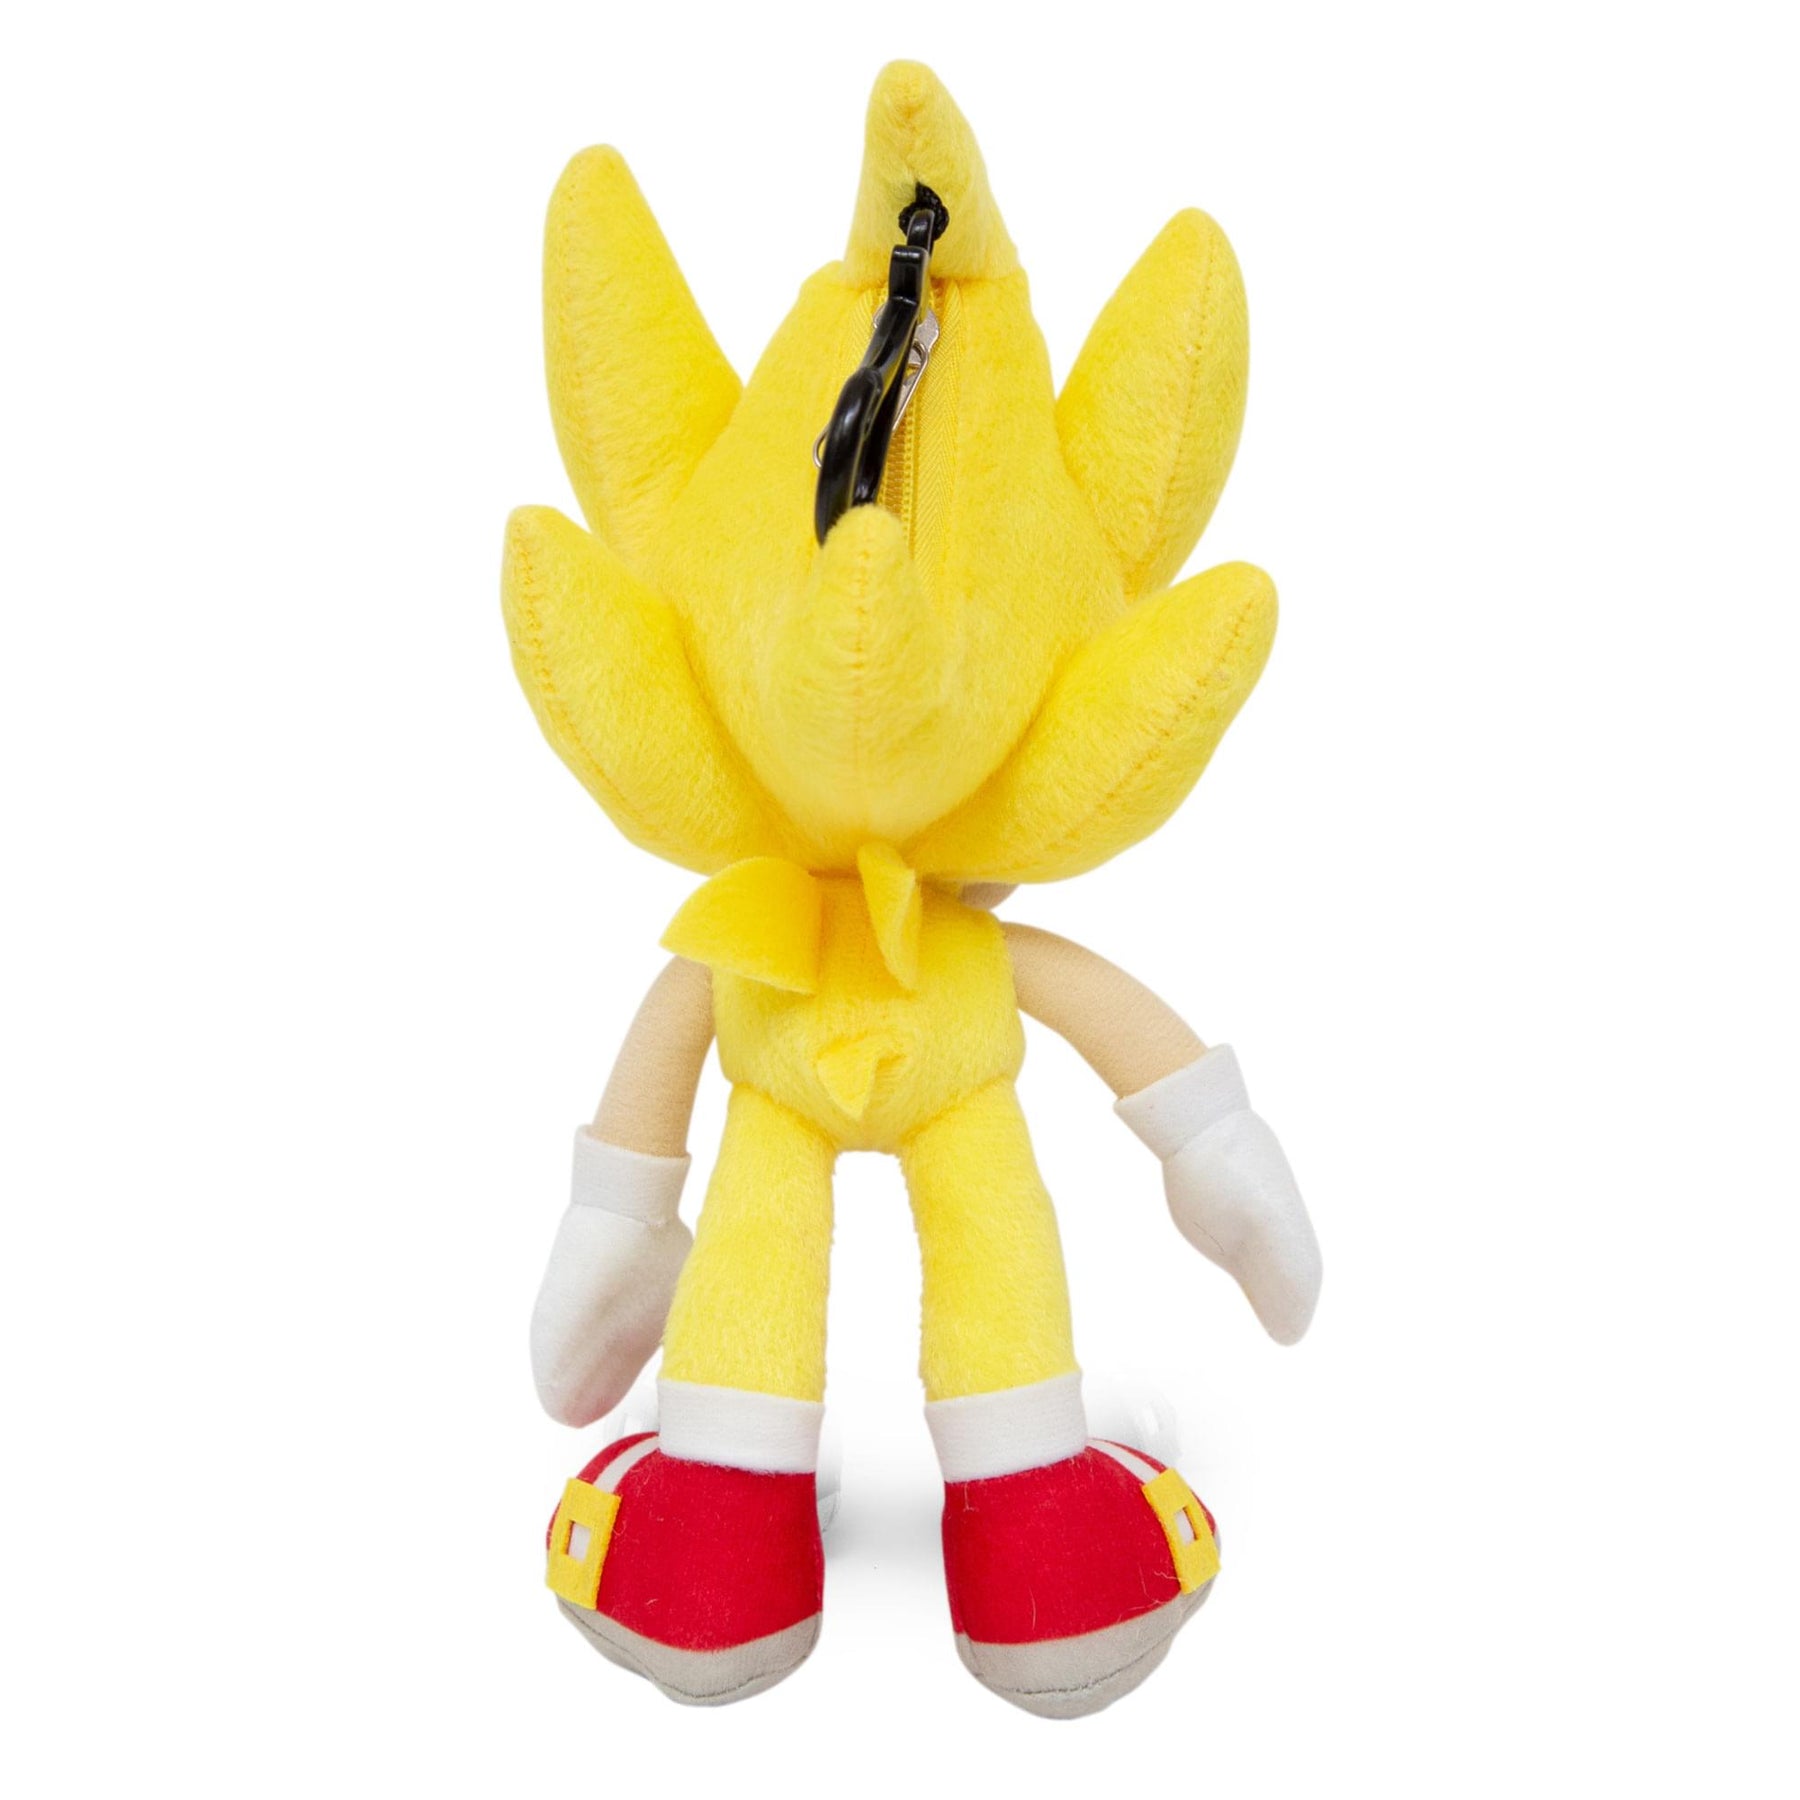 Sonic the Hedgehog 8-Inch Character Plush Toy | Super Sonic